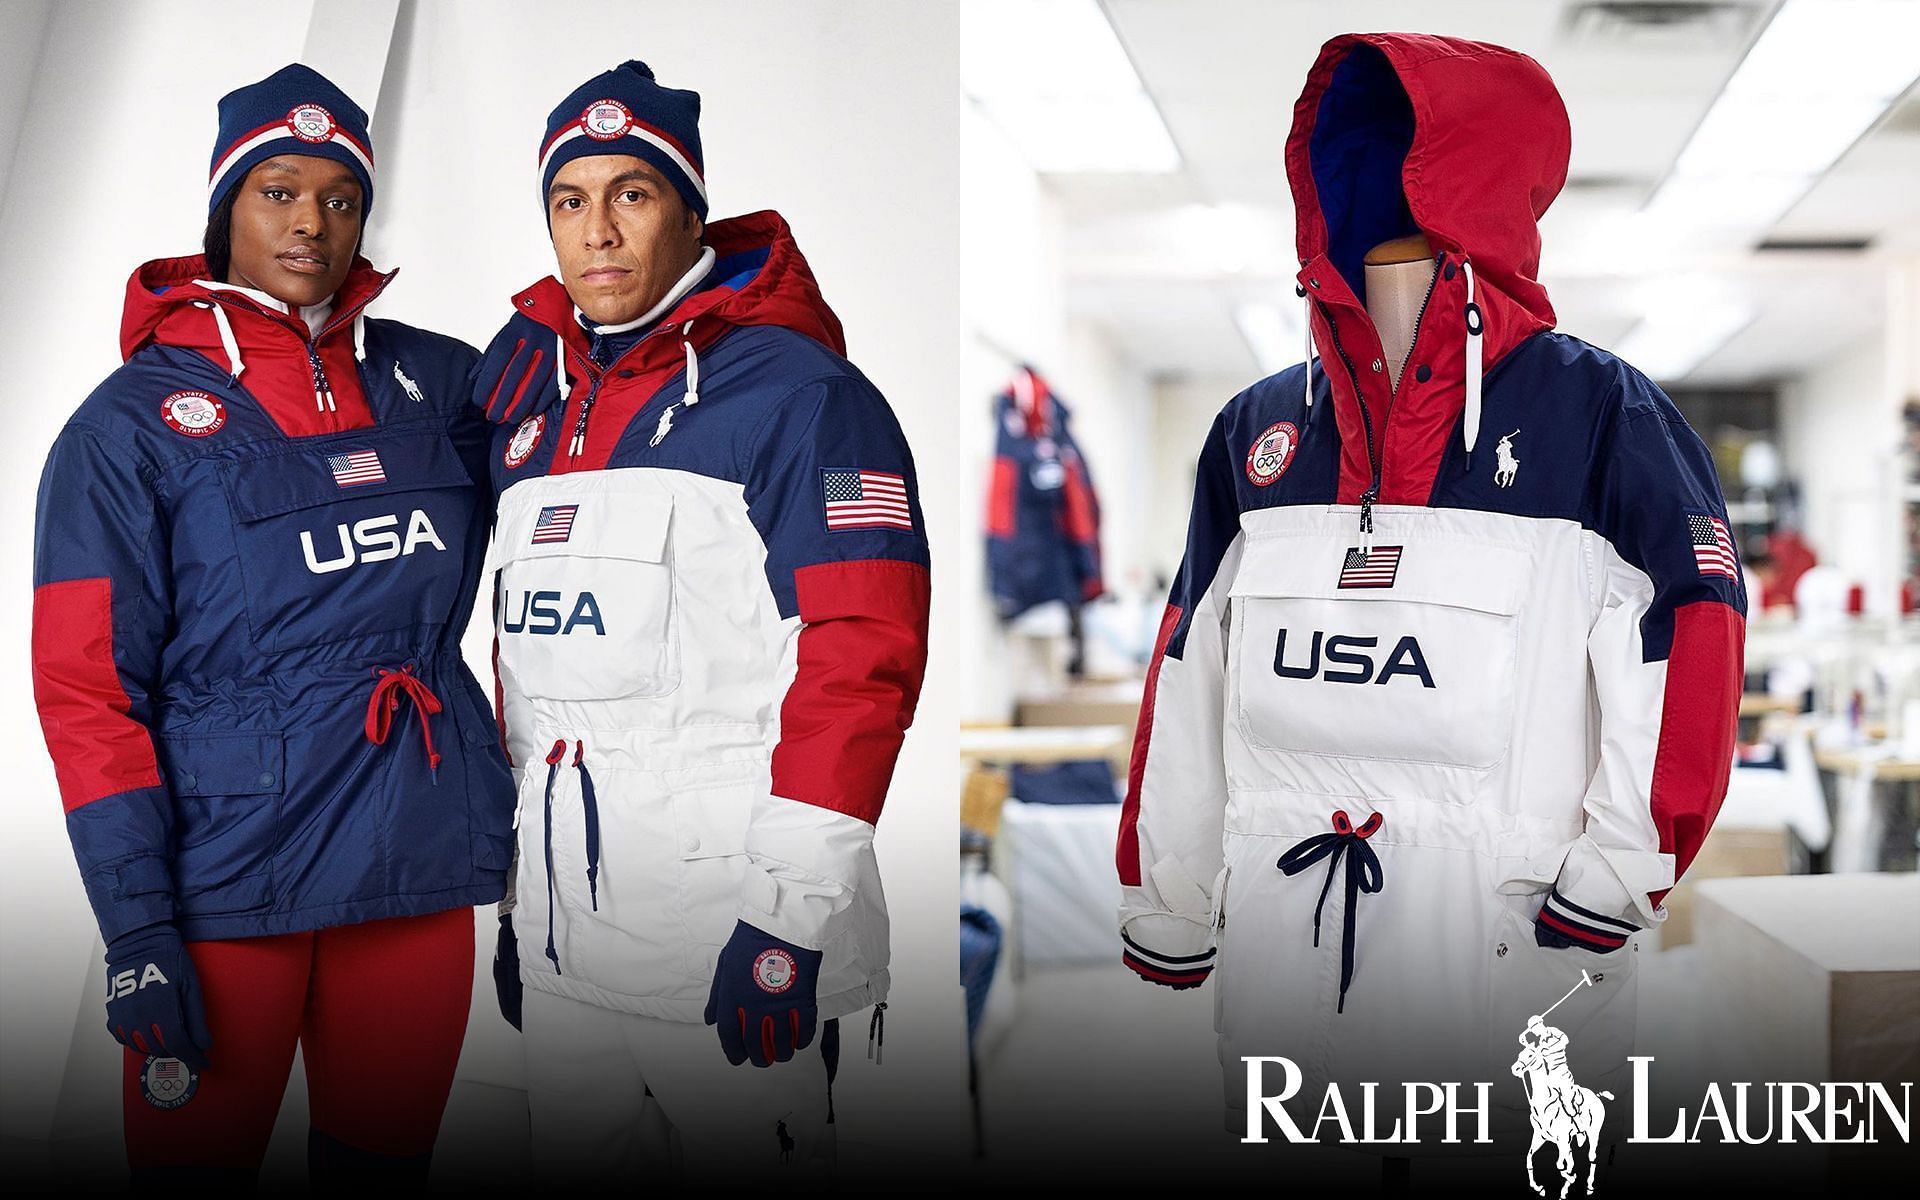 How did Ralph Lauren get his logo? Brand history explored as it unveils  Team USA's Olympic uniforms